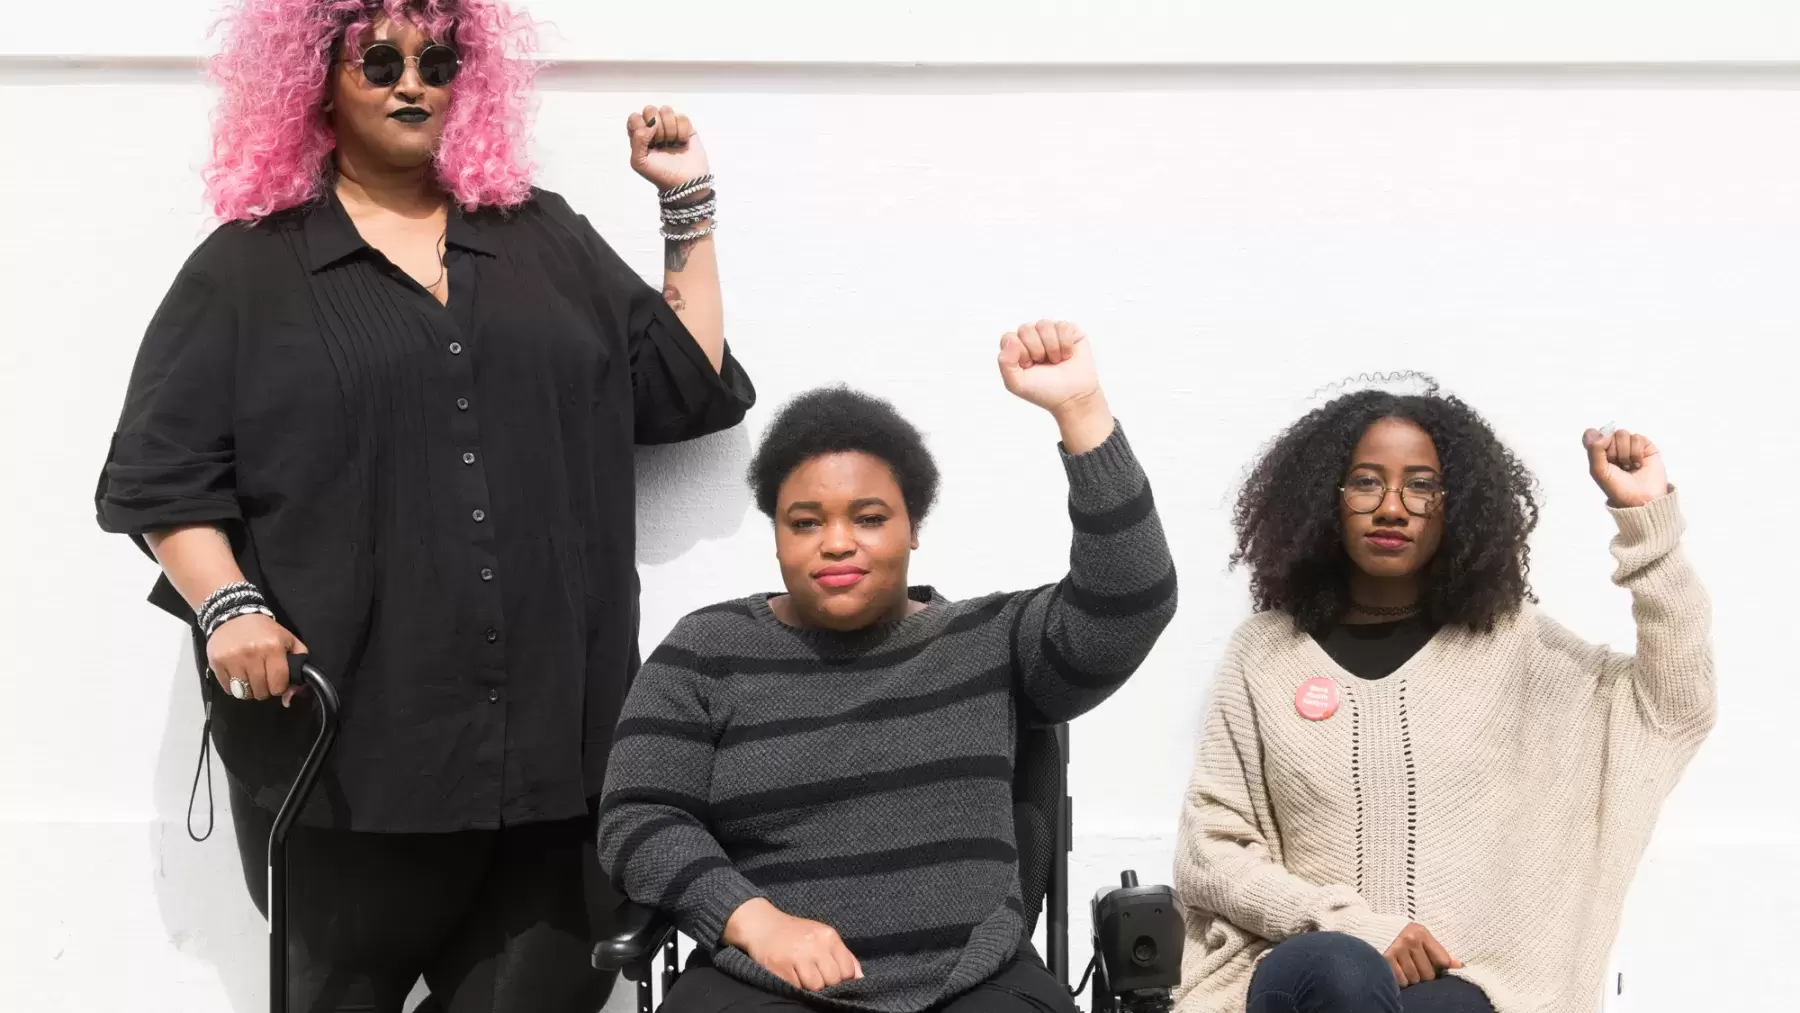 Torso level photo of three Black and disabled folx (a non-binary person holding a cane, a woman in a power wheelchair, and a woman on a folding chair) raising their fists on the sidewalk in front of a white wall.